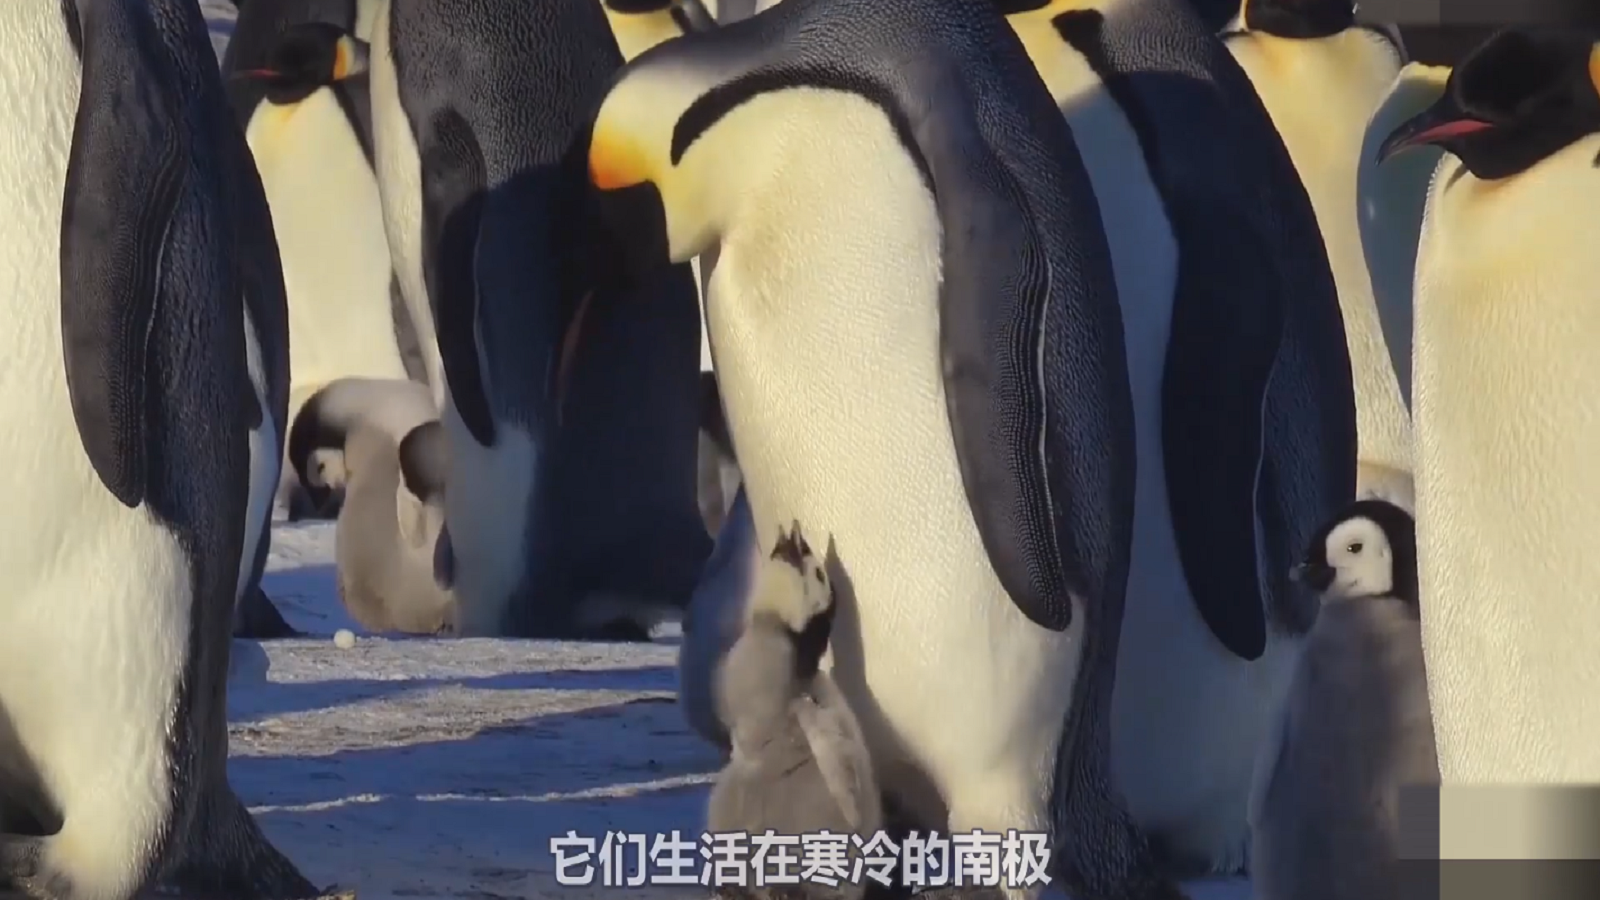 The baby penguin wants to get warm in the pouch, but he is not careful. An embarrassing scene appears.